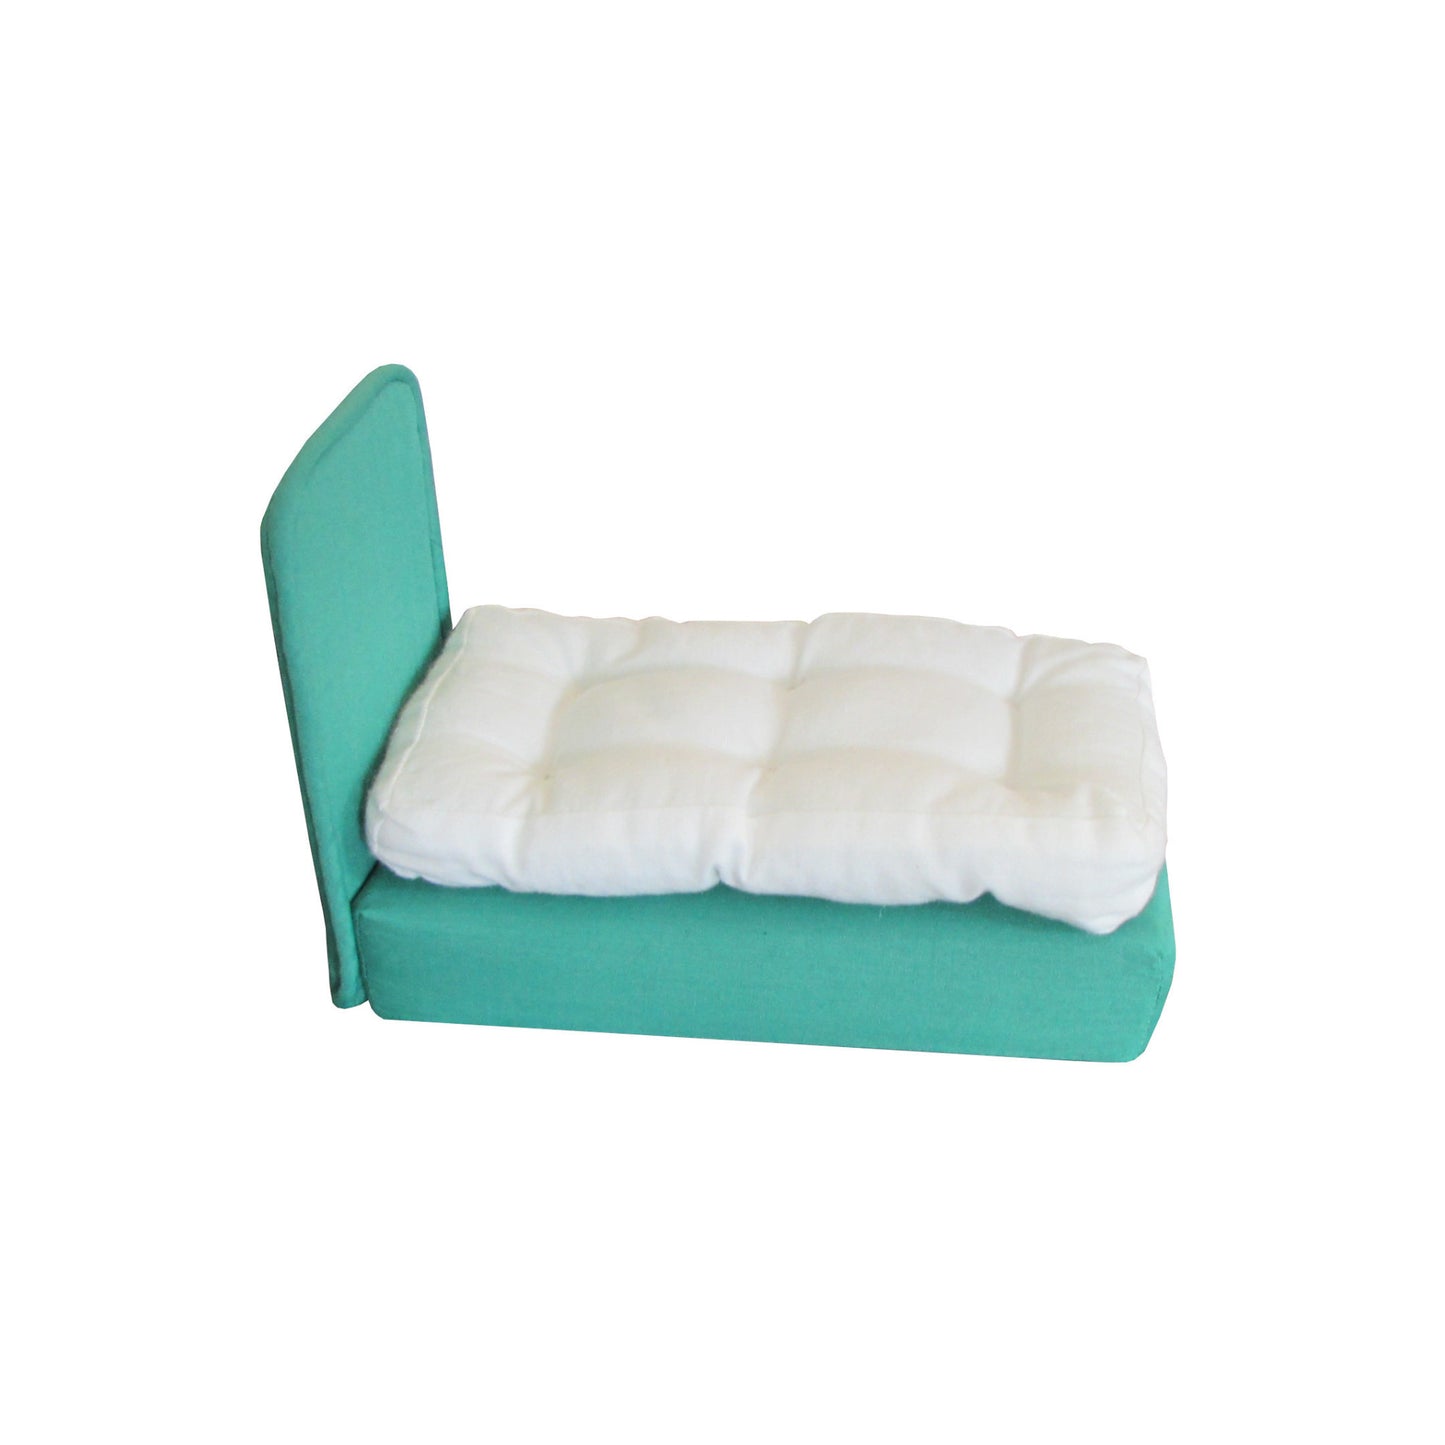 Upholstered Kelly Green Doll Bed for 6.5-inch dolls